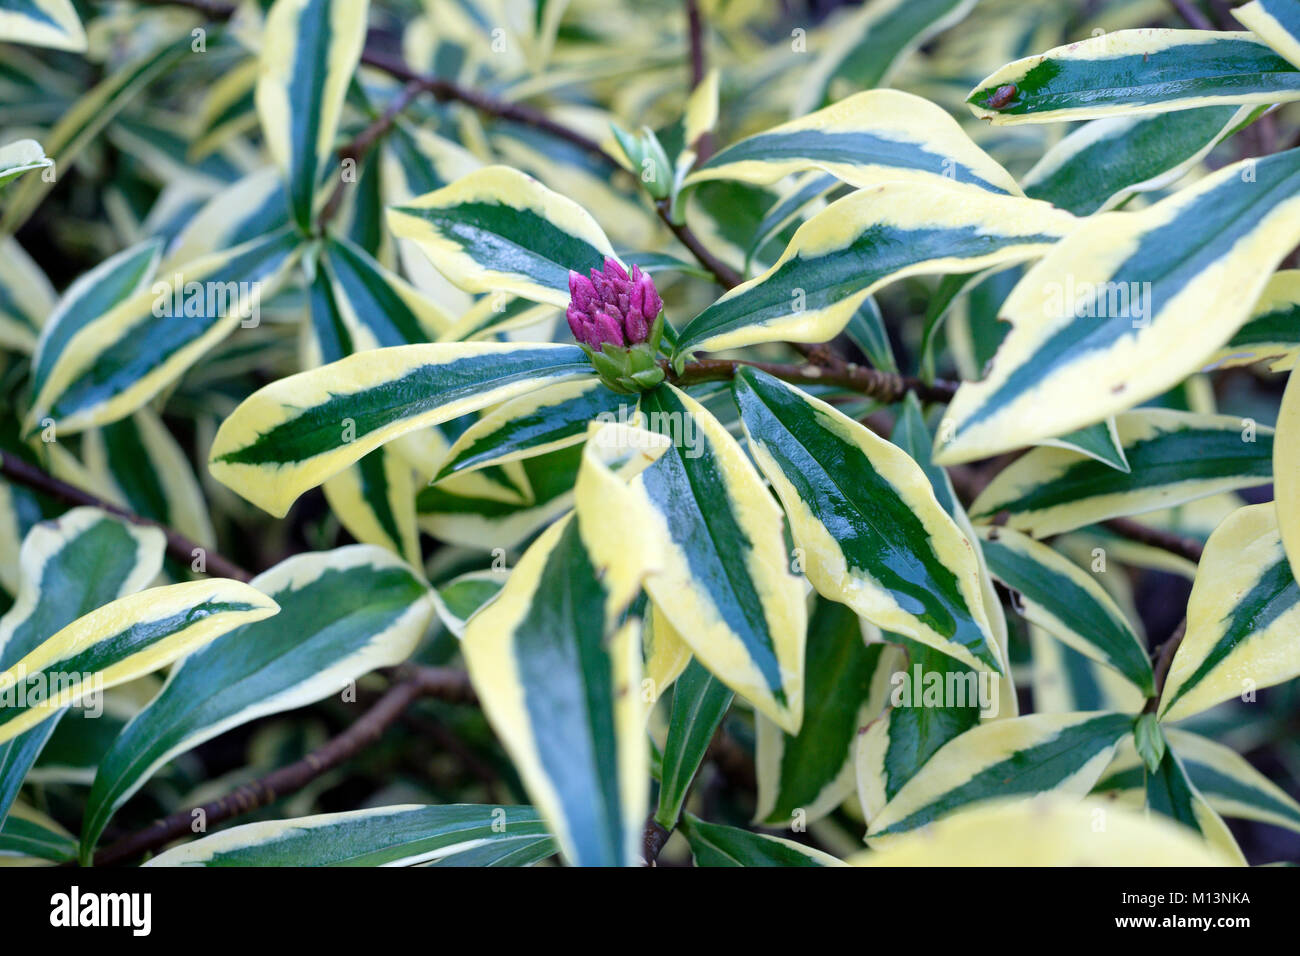 Pink-purple buds and yellow-green variegated leaves of Daphne odora Maejima in January Stock Photo